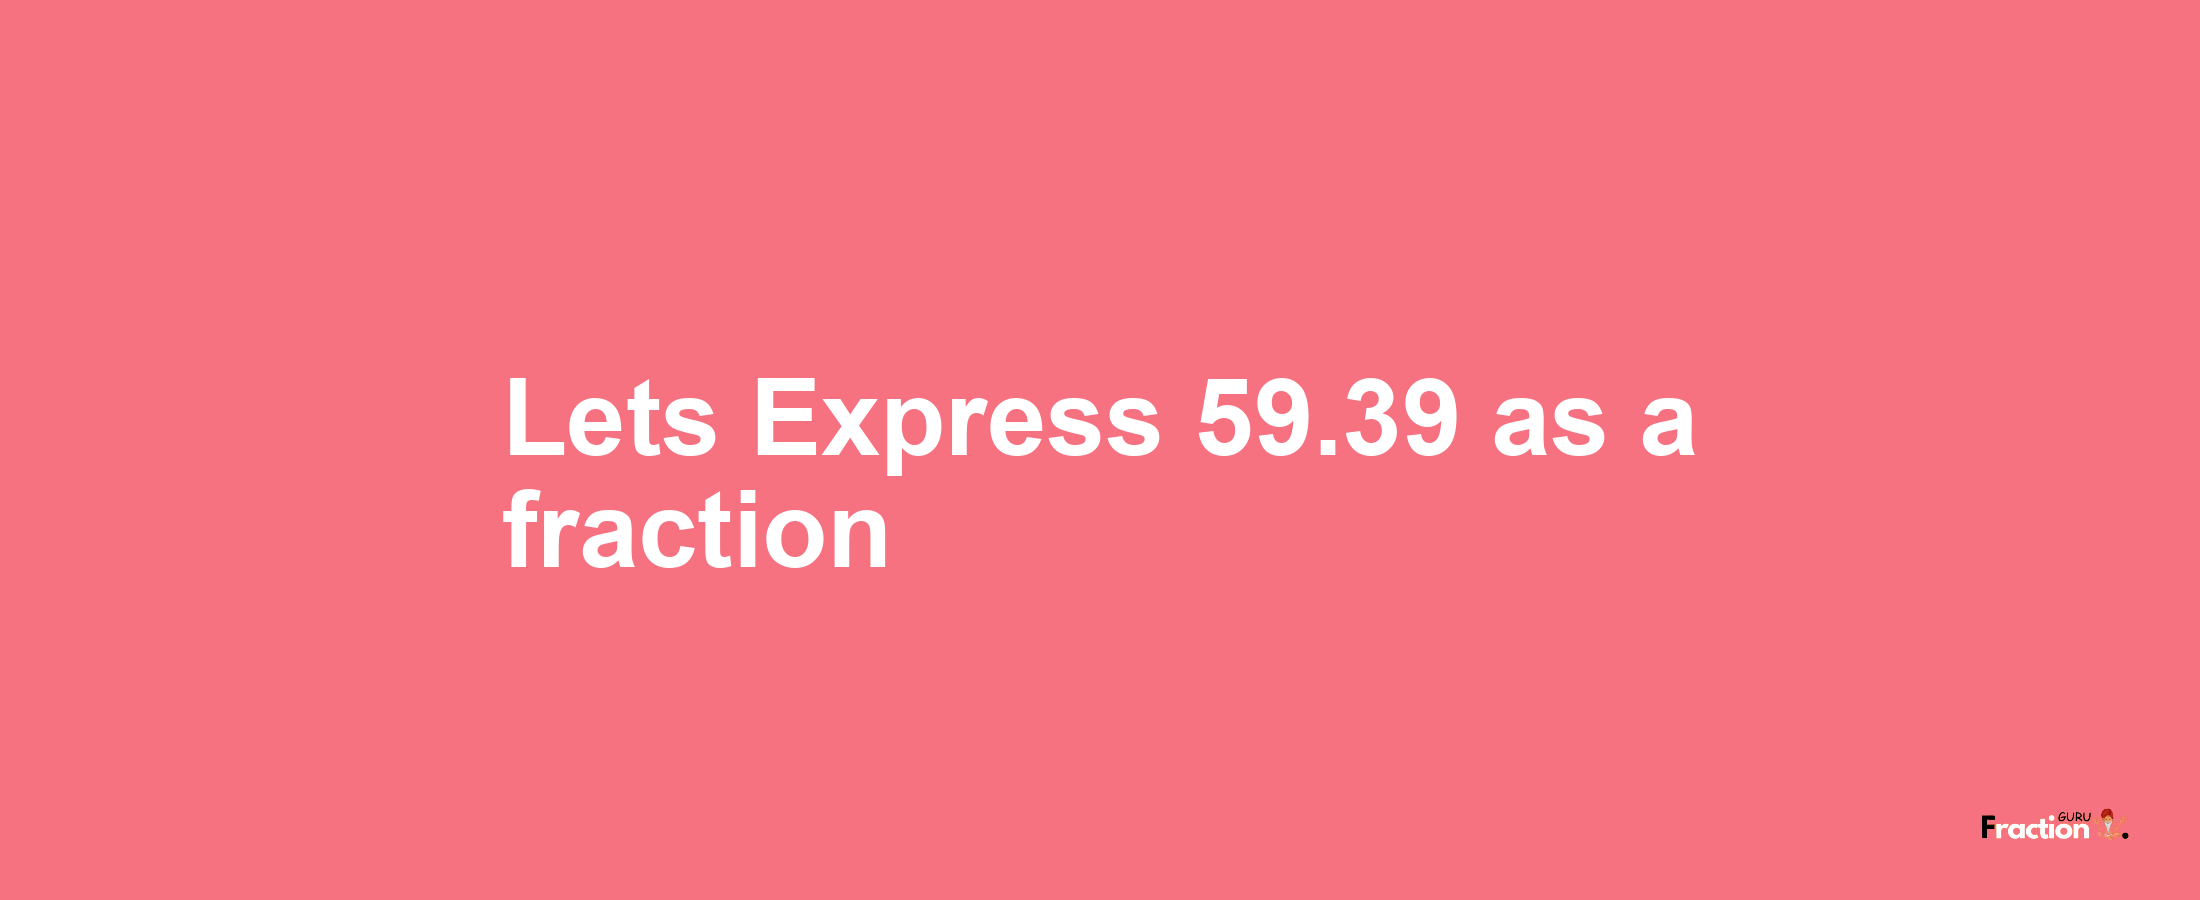 Lets Express 59.39 as afraction